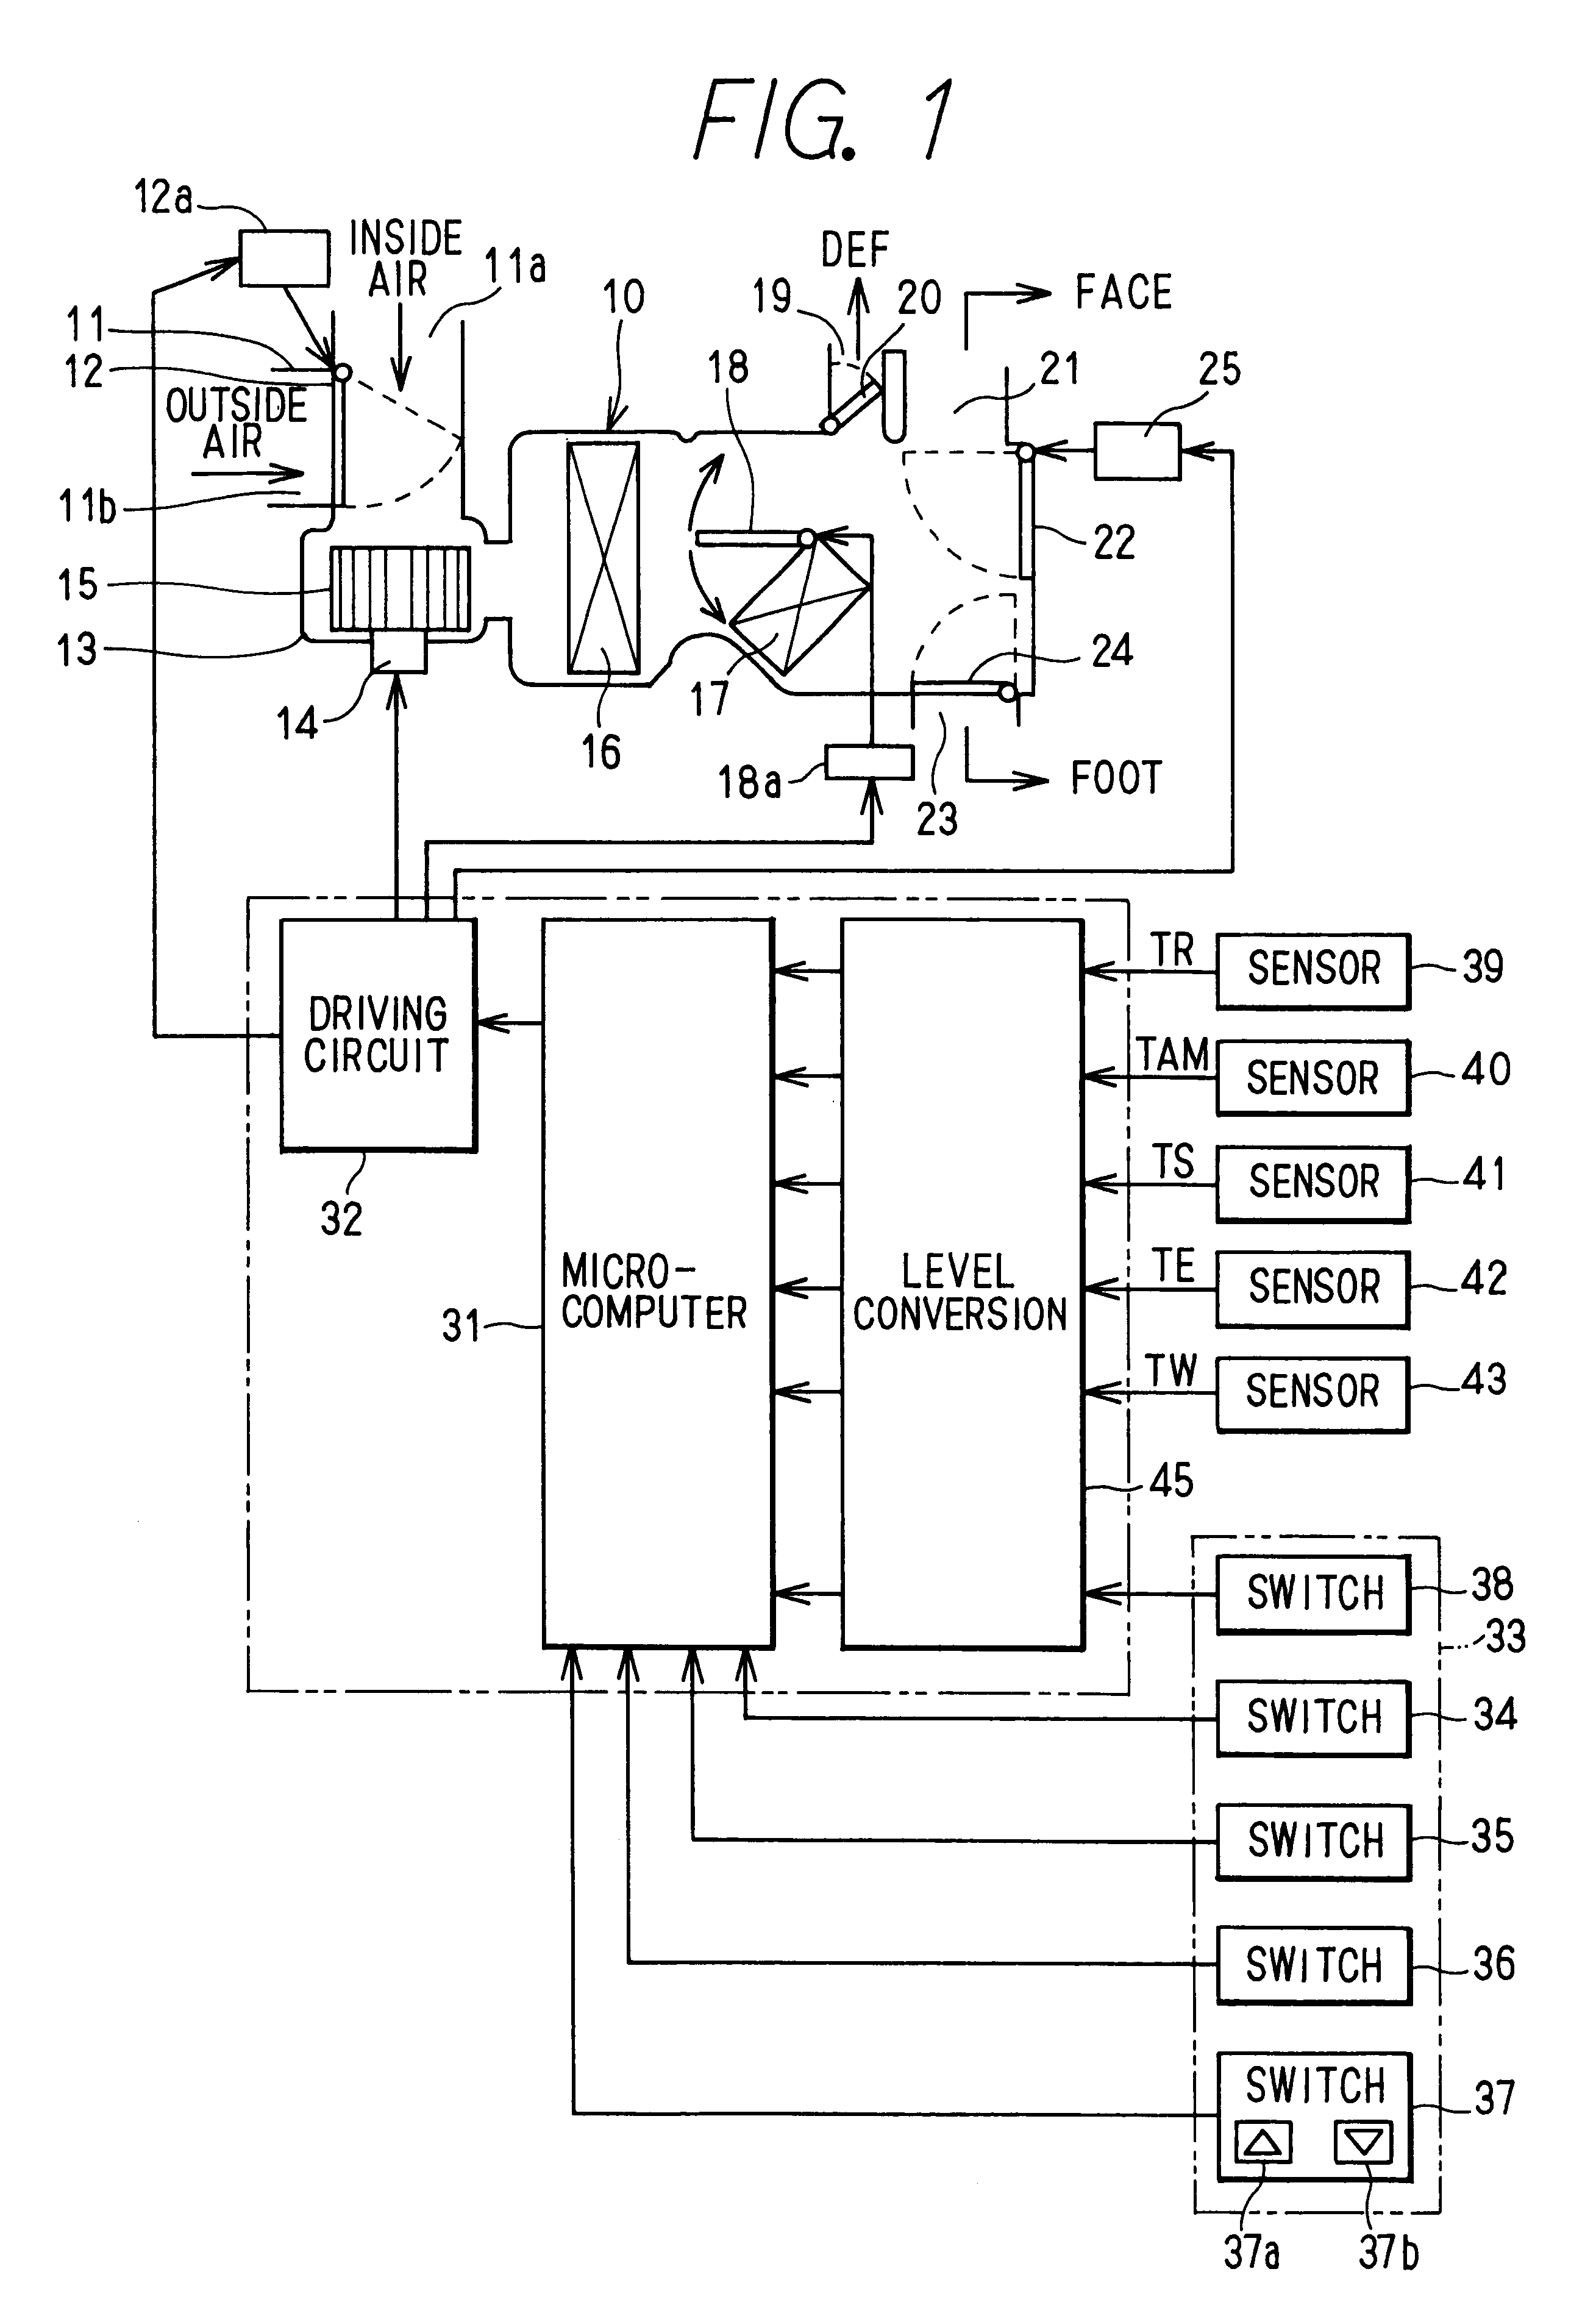 Automatic air conditioner having learning function and control method of control system